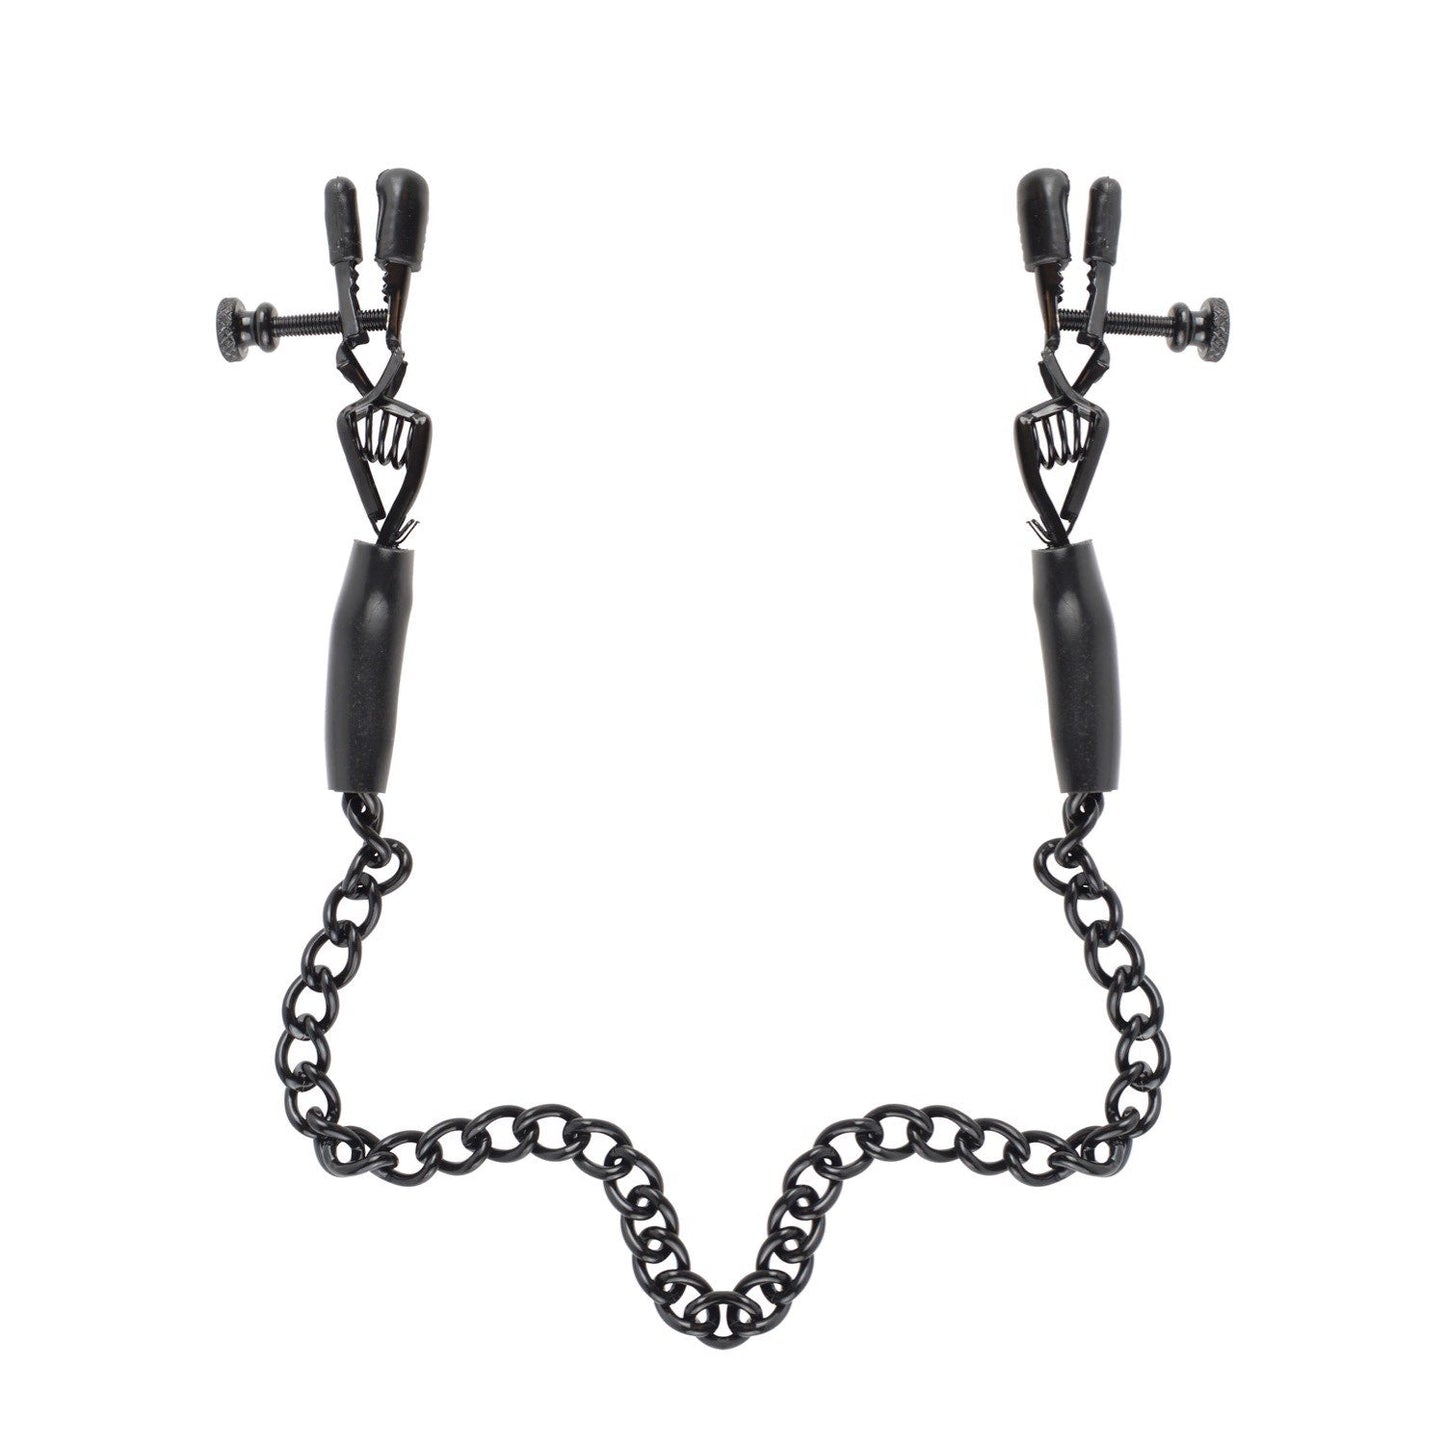 Adjustable Nipple Chain Clamps - Black Nipple Clamps with Chain